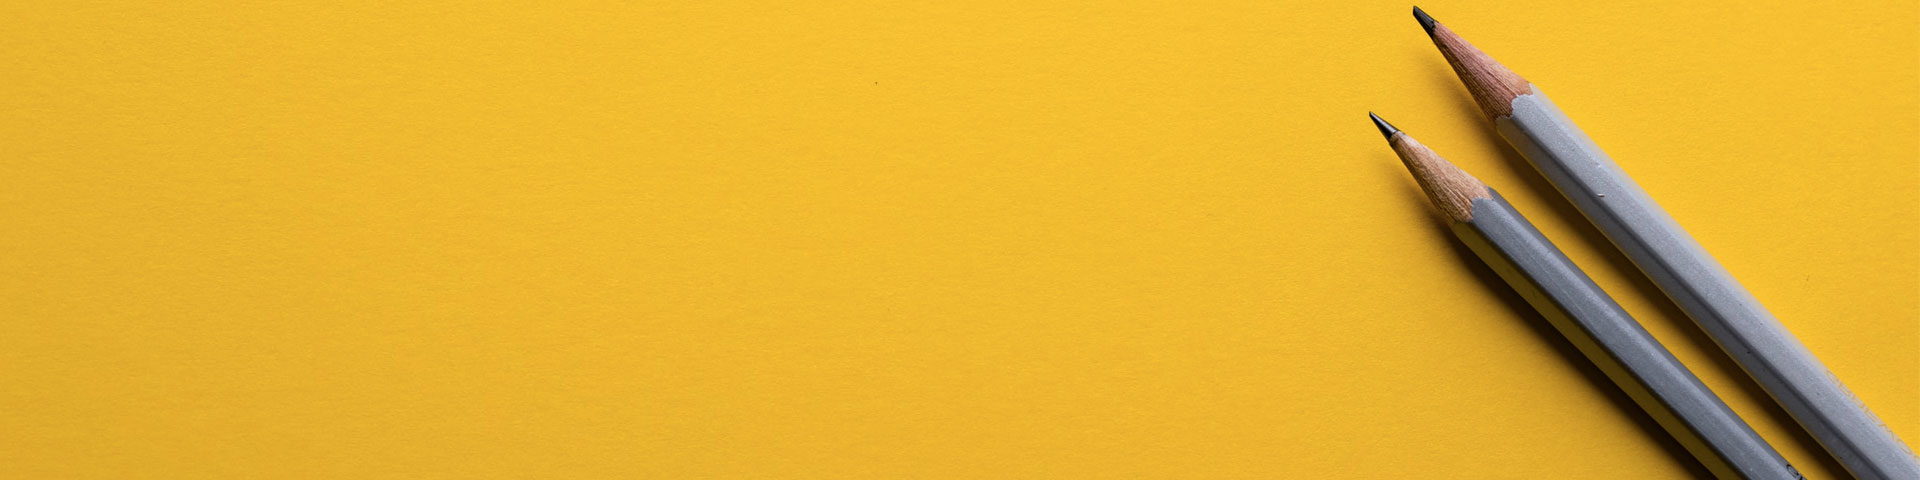 Two sharp grey pencils rest on the far right side of an all yellow backdrop.